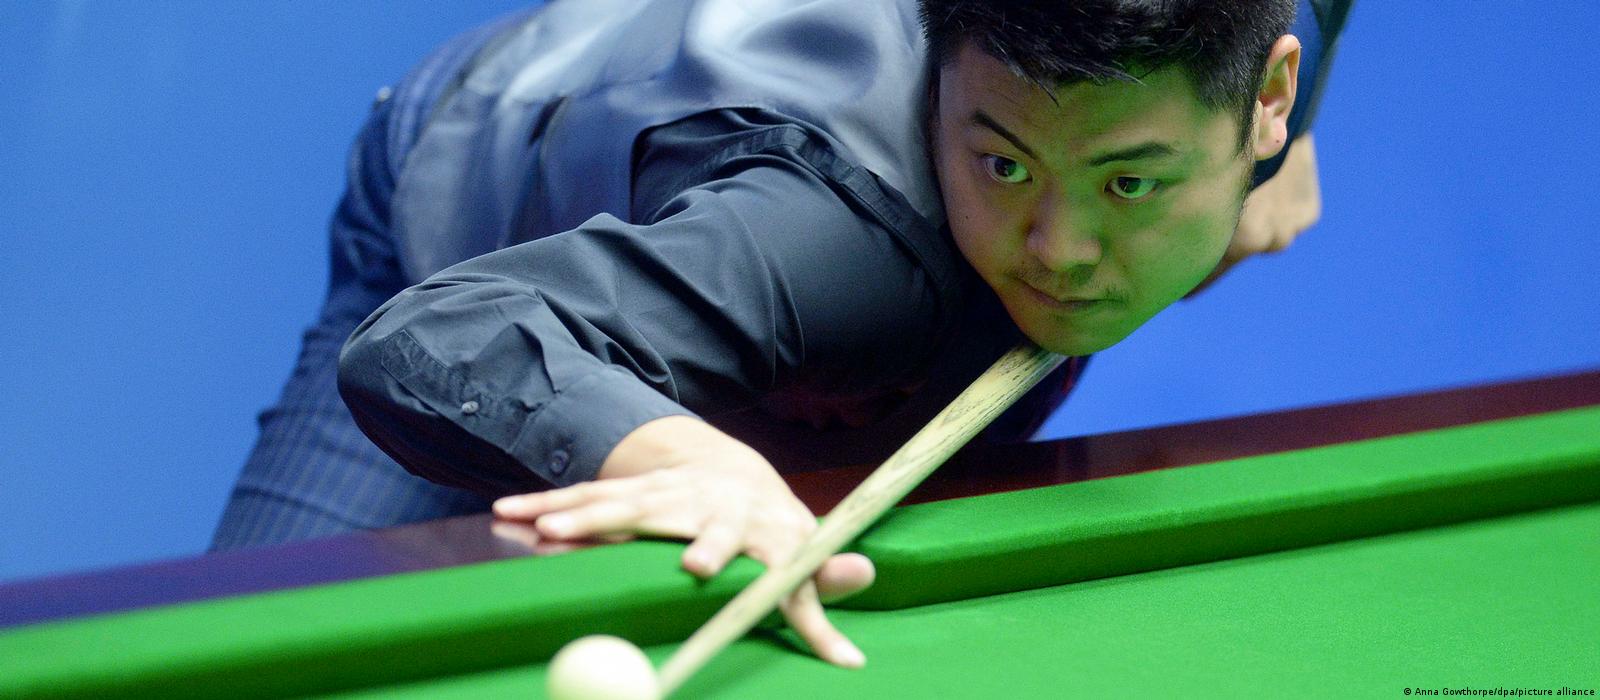 Snooker Chinese players banned for life for match-fixing – DW